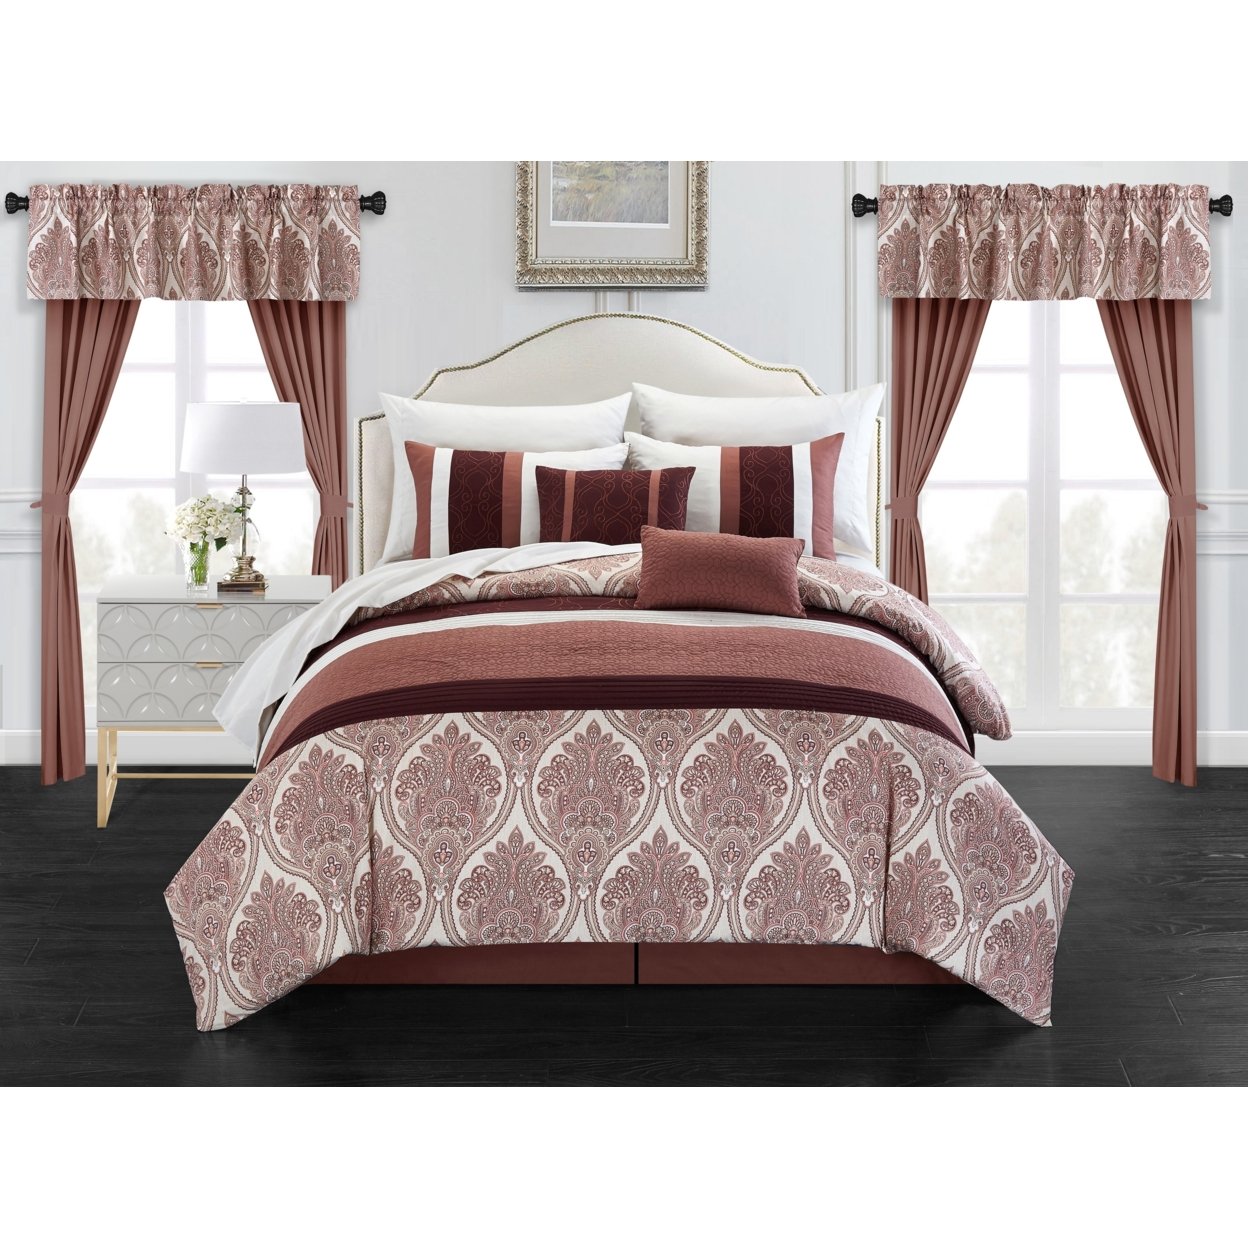 Vivaldi 20 Piece Comforter Set Medallion Quilted Embroidered Design Bed in a Bag Bedding - Brick, Queen